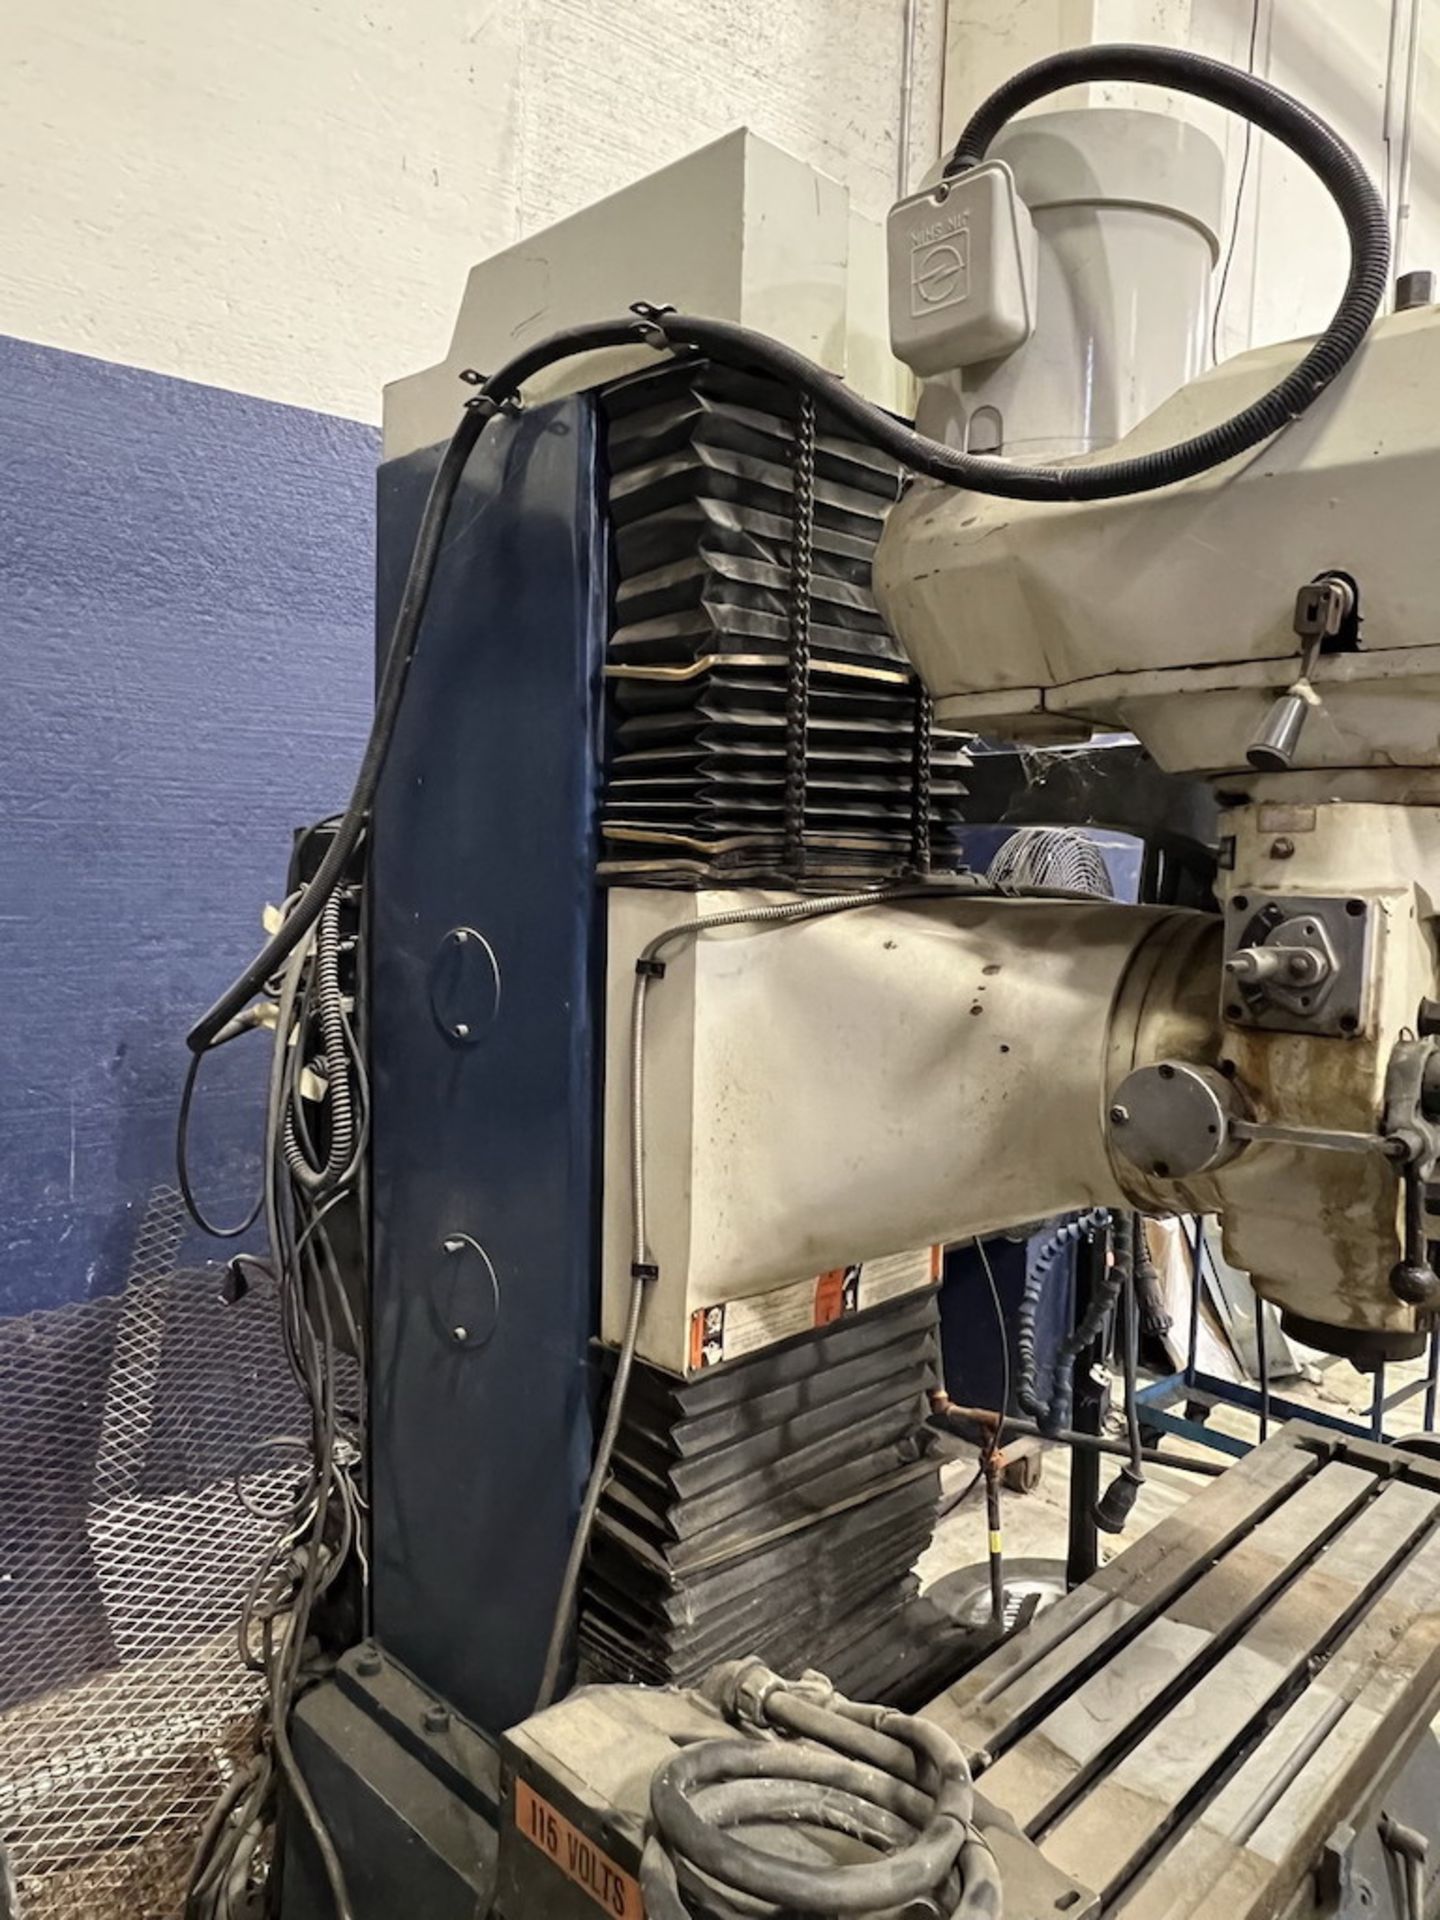 South Western Industries Trak DPM Vertical Milling Machine - Image 7 of 12